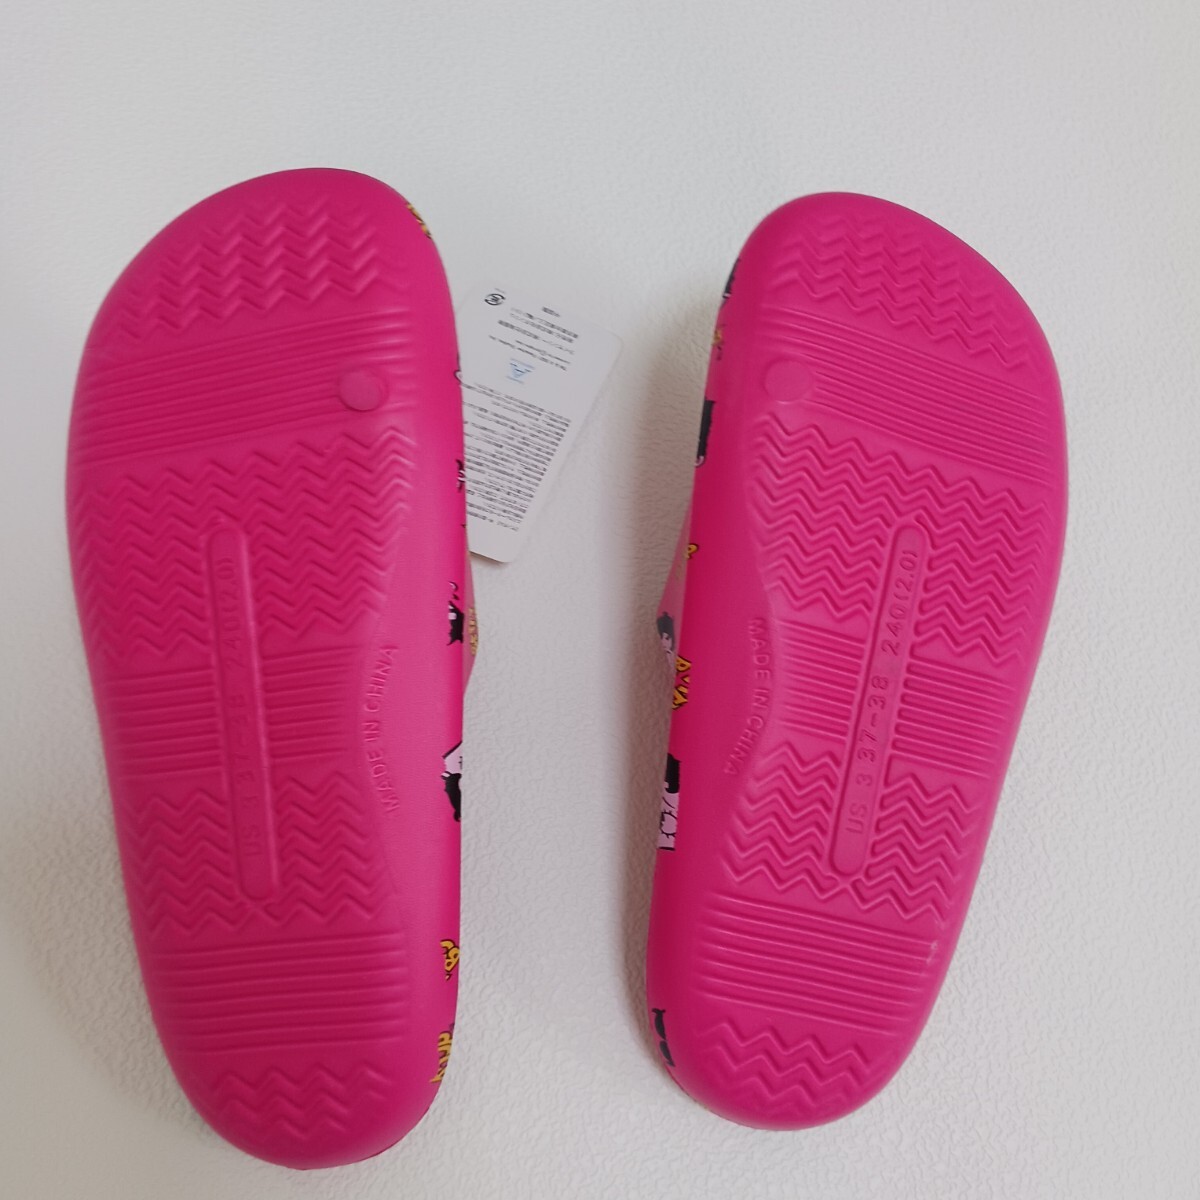  unused peti sandals shower shoes playing in water light weight character slippers room shoes 